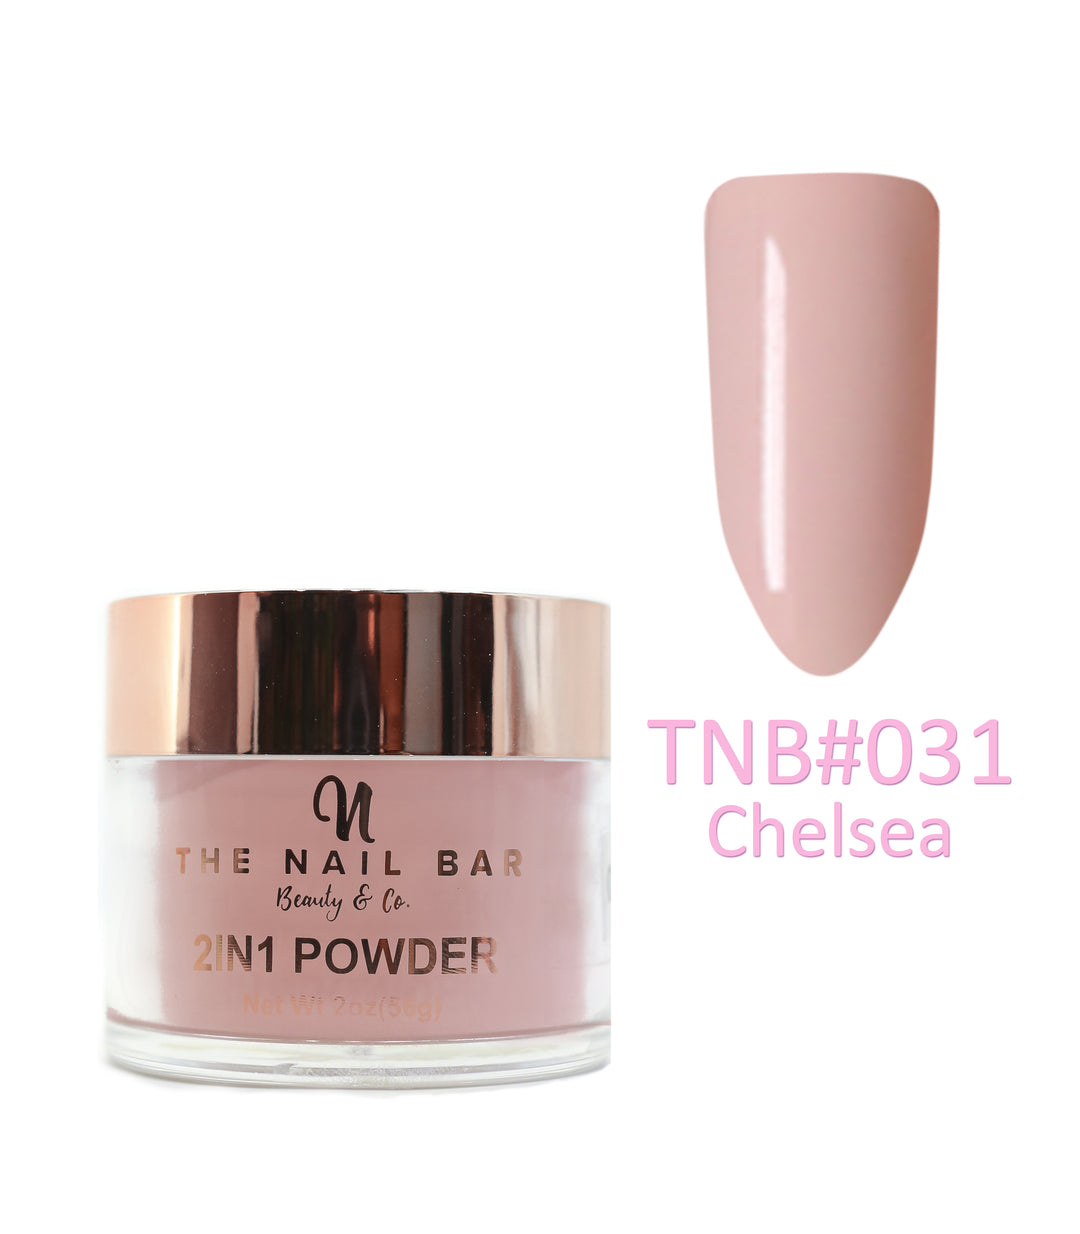 2-In-1 Dipping/Acrylic colour powder (2oz) -Chelsea - The Nail Bar Beauty & Co.